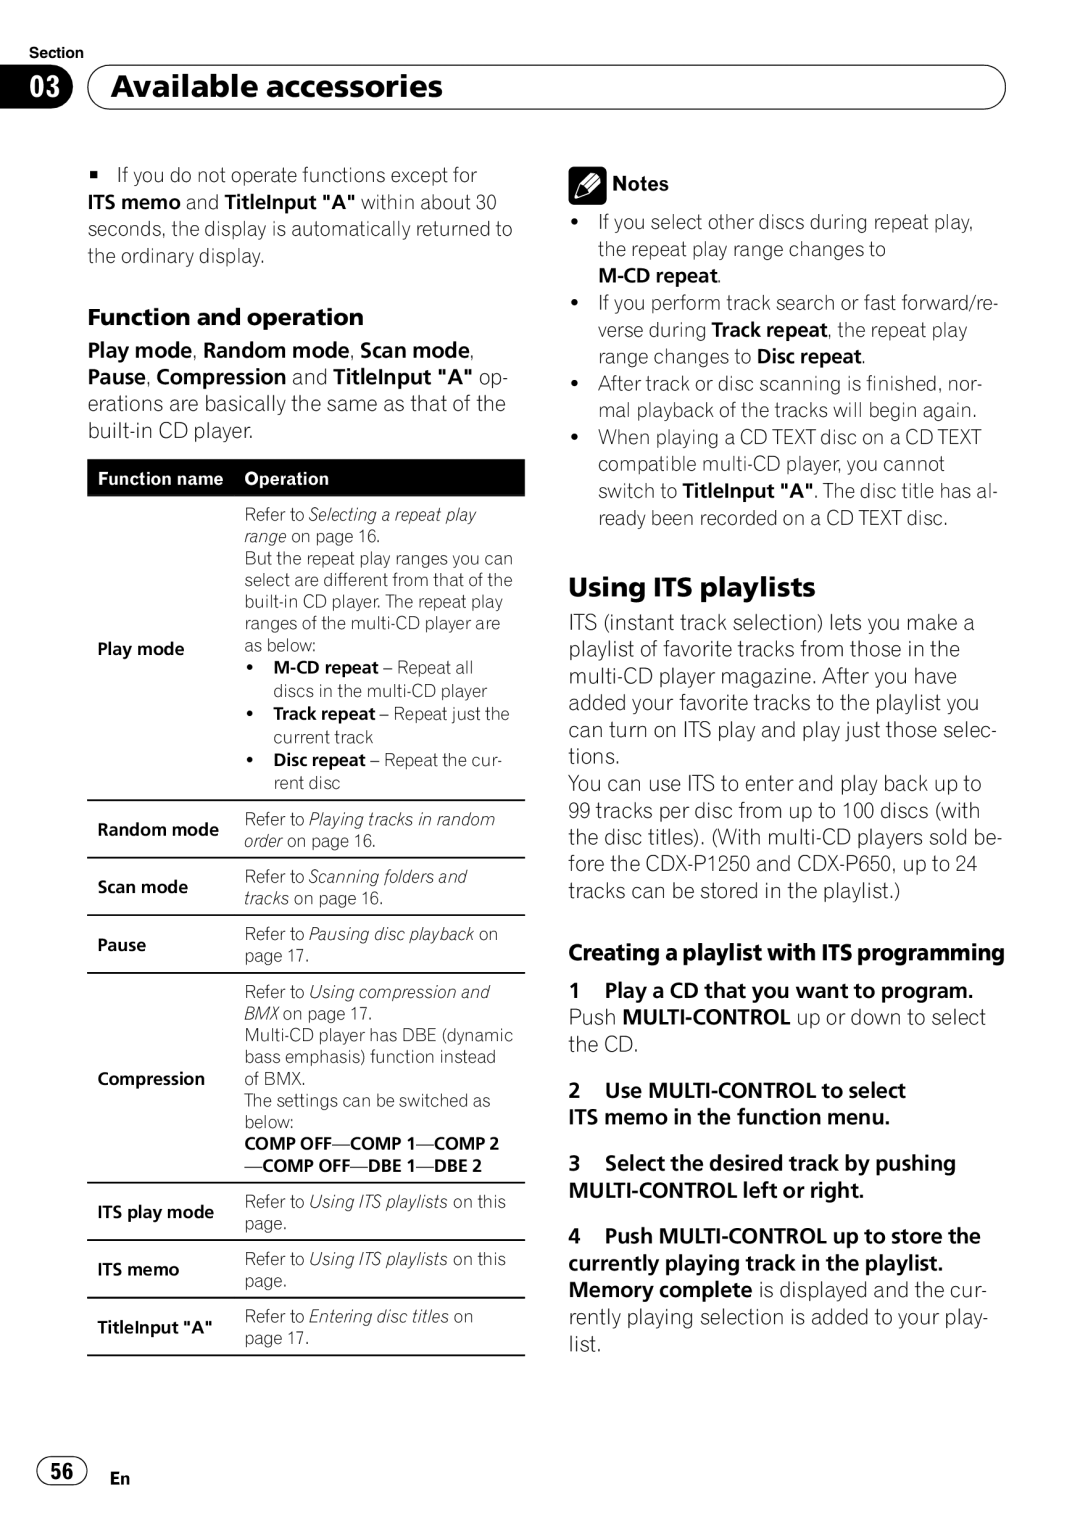 Pioneer DEH-P6900UB operation manual Using ITS playlists, Creating a playlist with ITS programming, 03Available accessories 